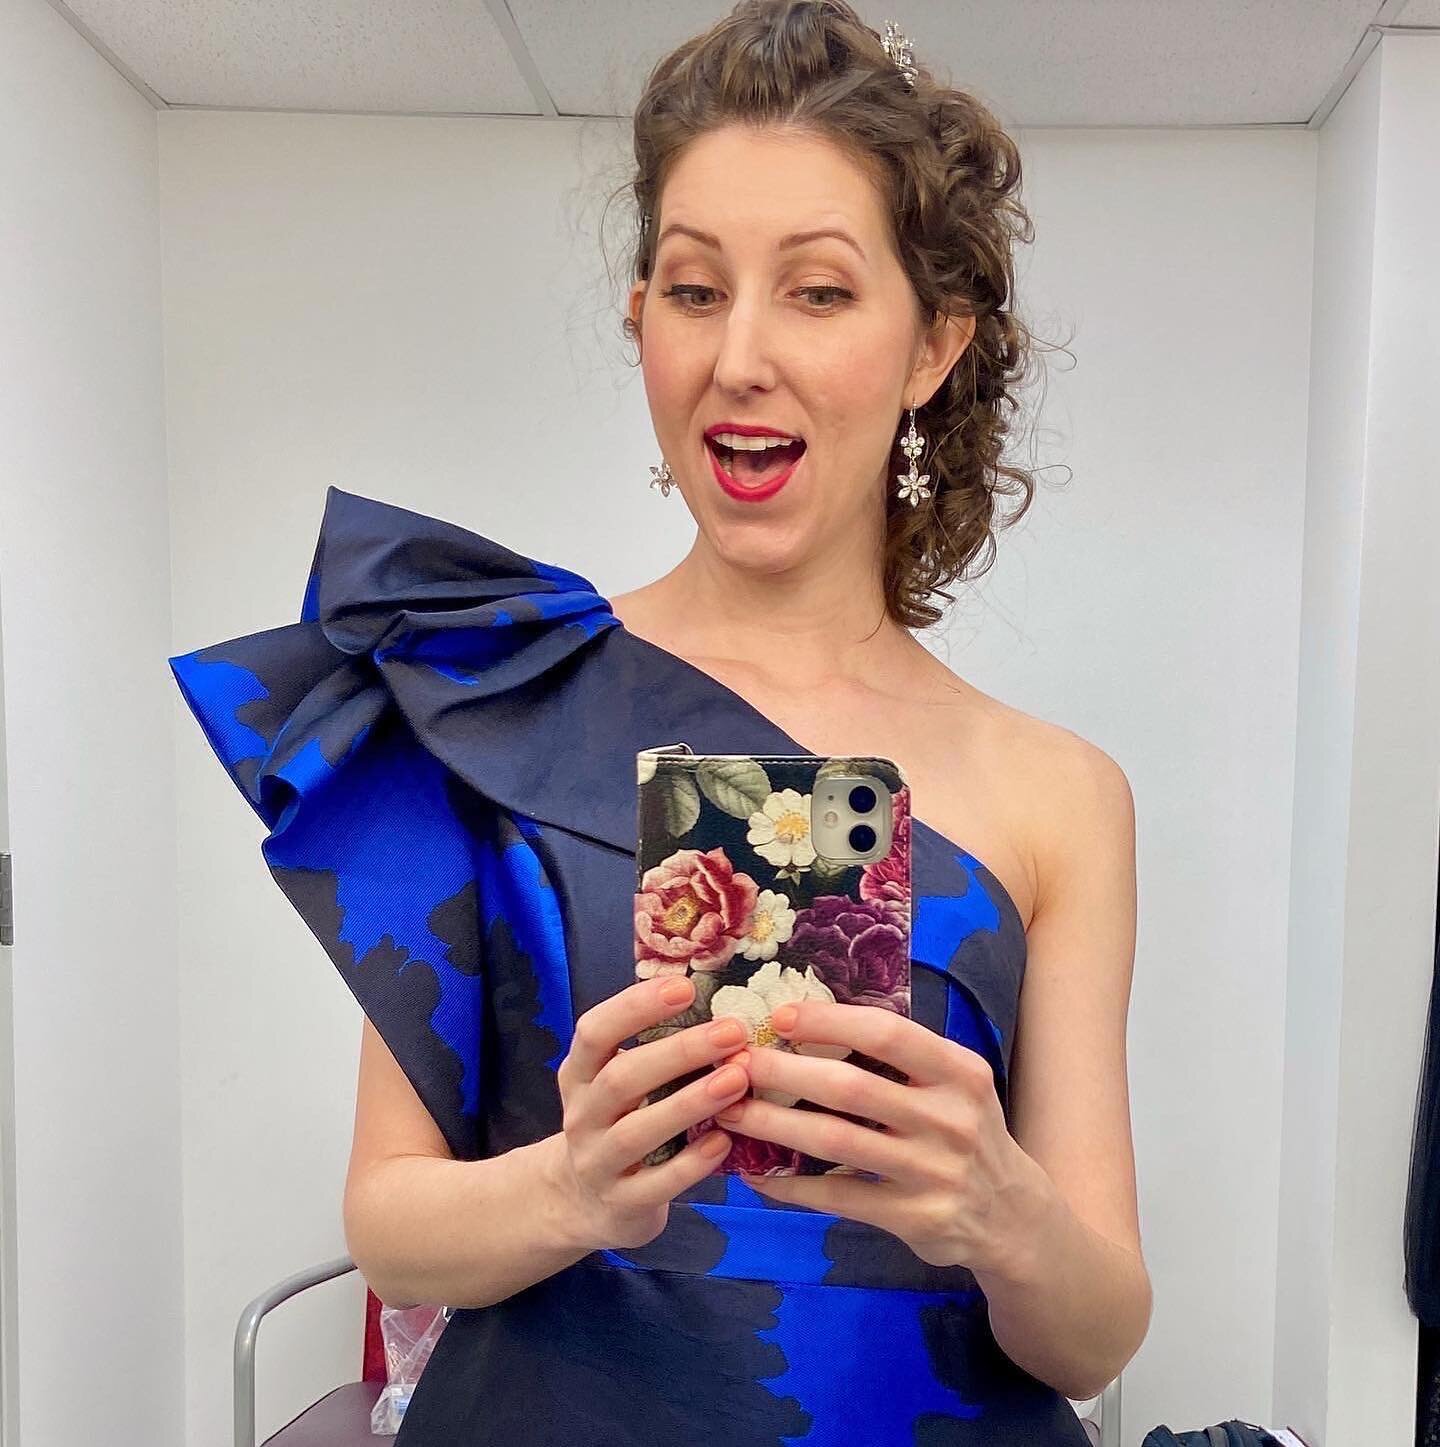 &bull;GRATEFUL&bull;

It was such a thrill to repeat the role of Flora in La Traviata with Miami Lyric Opera! This was my first time back on the opera stage after 20 long months. I&rsquo;m so grateful for my unbelievably talented and kind colleagues,